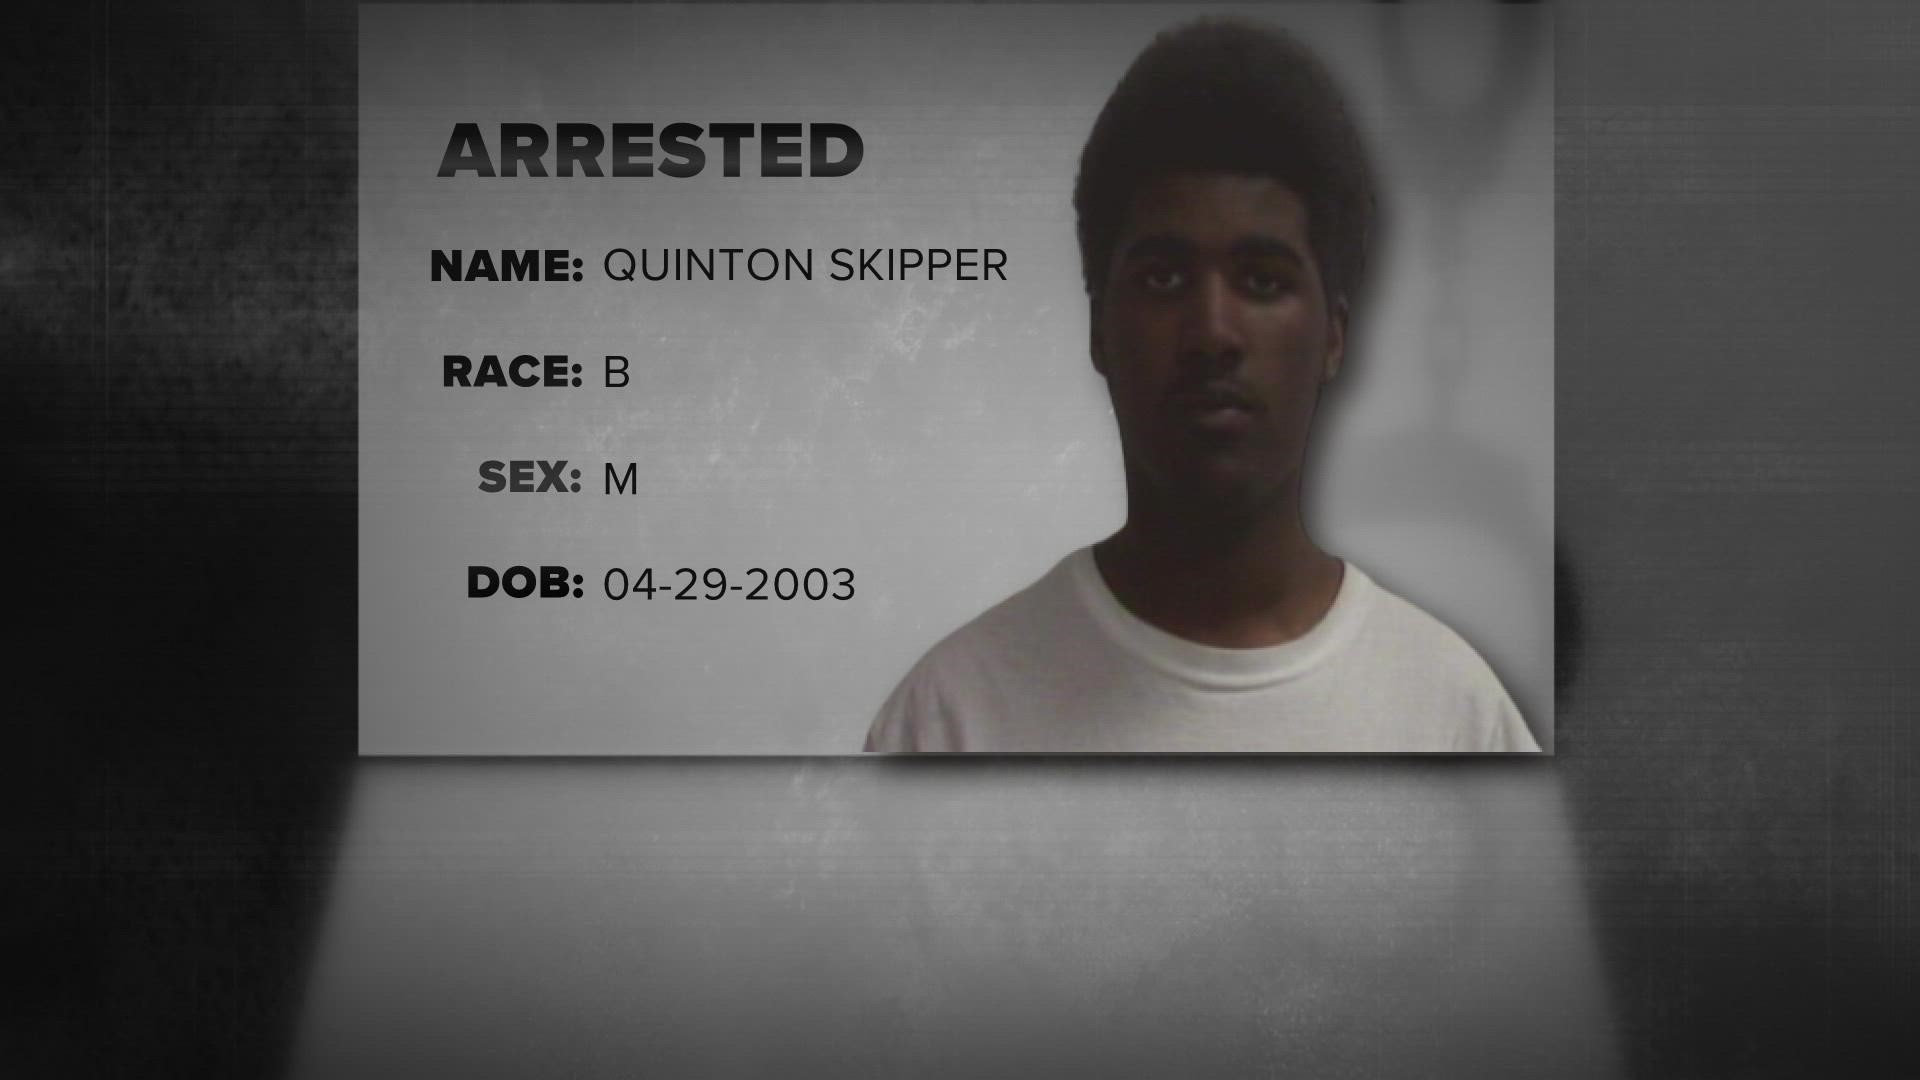 Quinton Skipper was a suspect in several carjackings in 2019. He was also charged with battery on an officer, yet he was out to become a suspect in more carjackings.